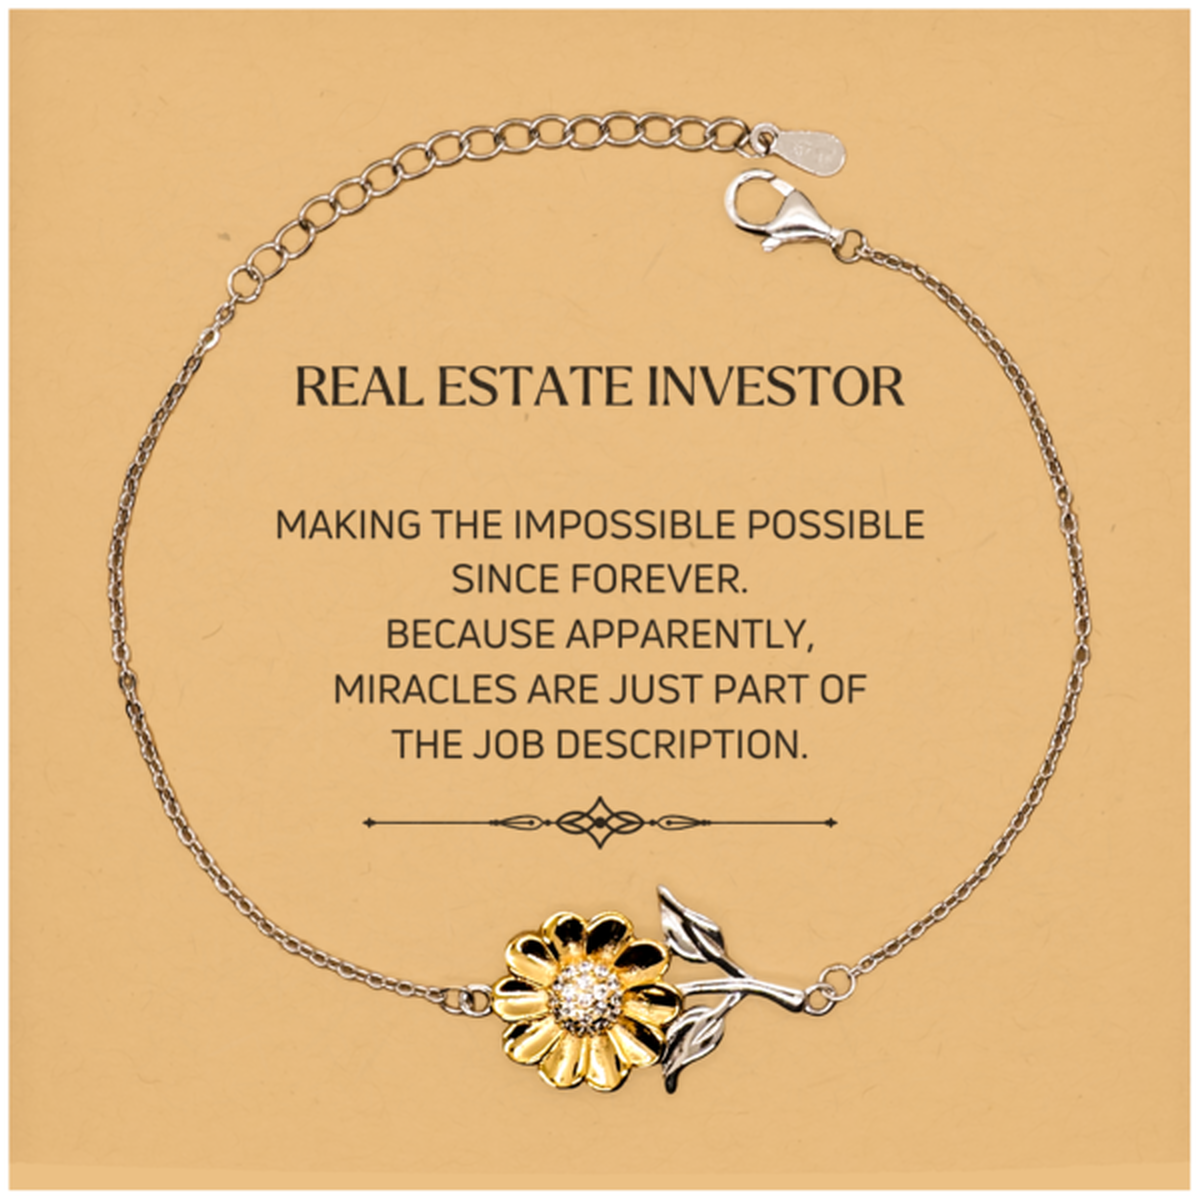 Funny Real Estate Investor Gifts, Miracles are just part of the job description, Inspirational Birthday Christmas Sunflower Bracelet For Real Estate Investor, Men, Women, Coworkers, Friends, Boss